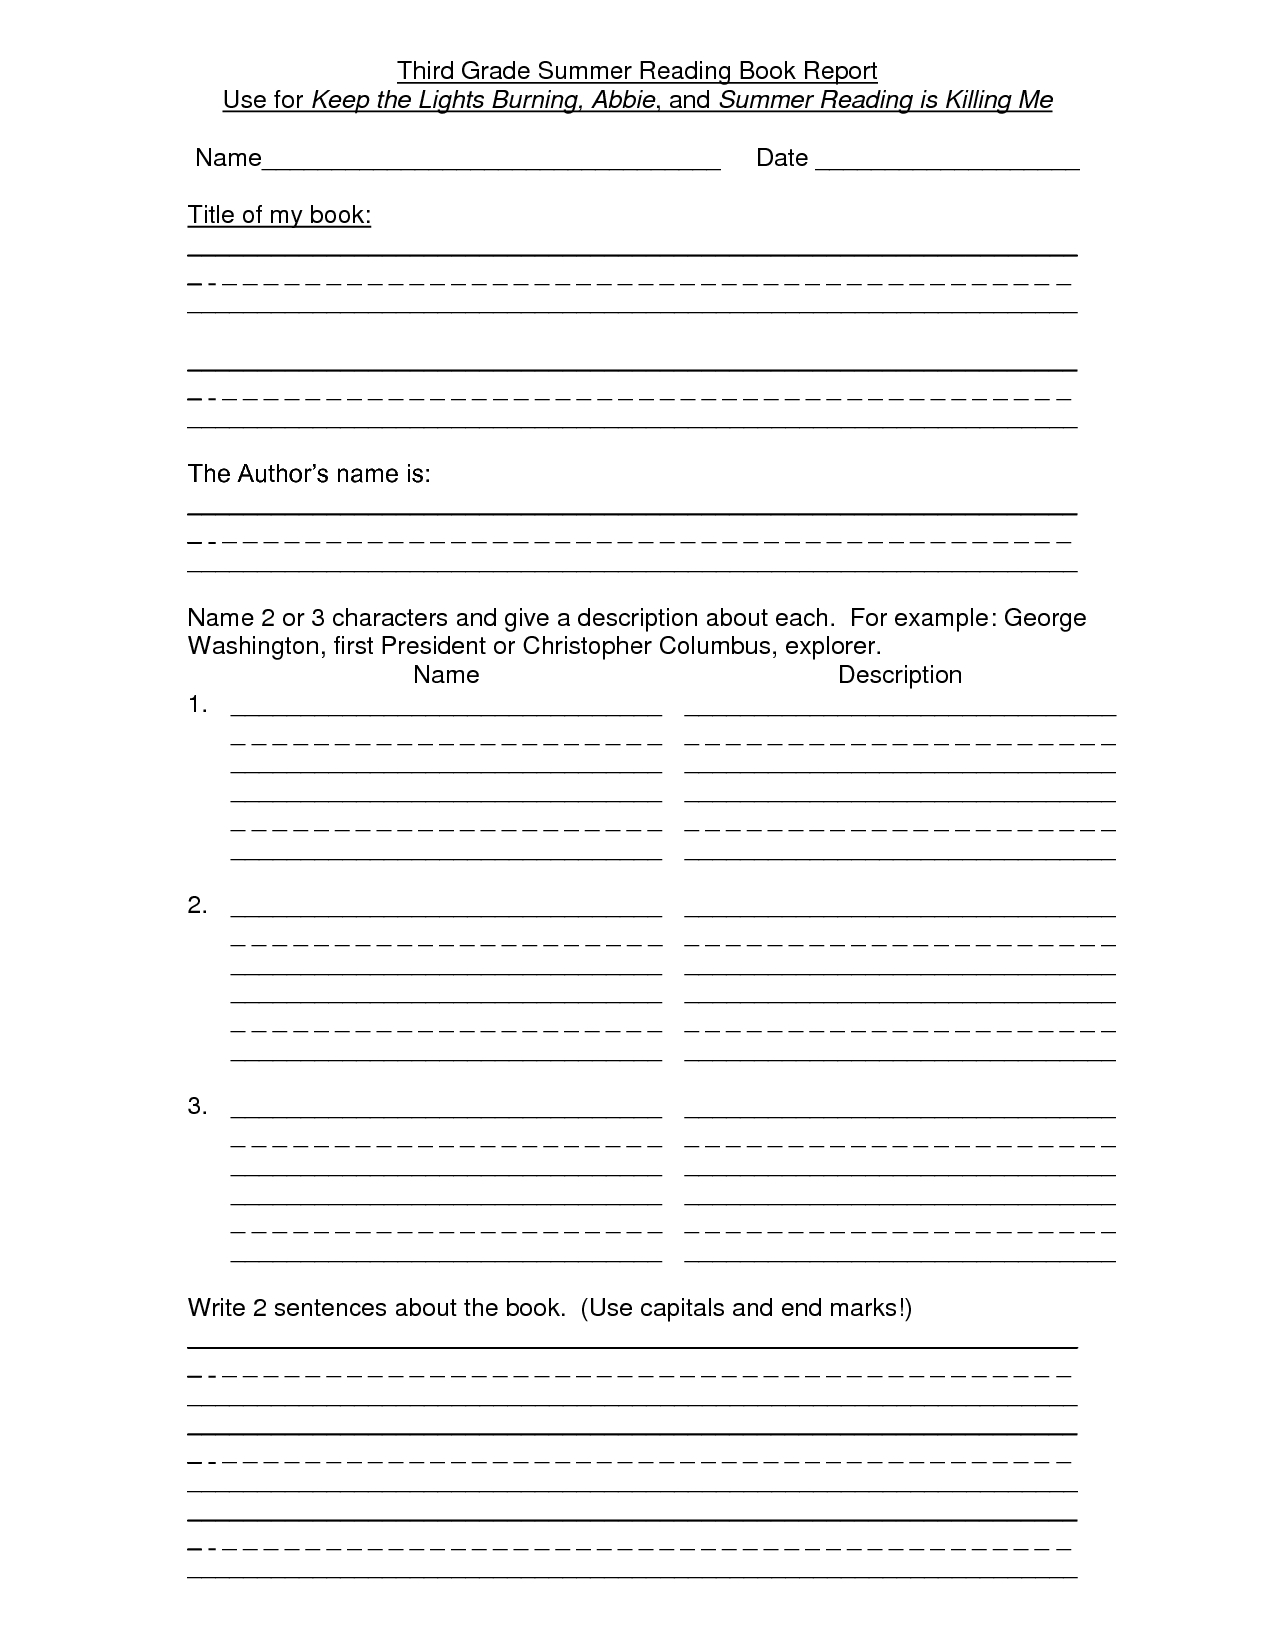 Cheap Custom Written Papers. Buy Argumentative Essay – Funny With Biography Book Report Template